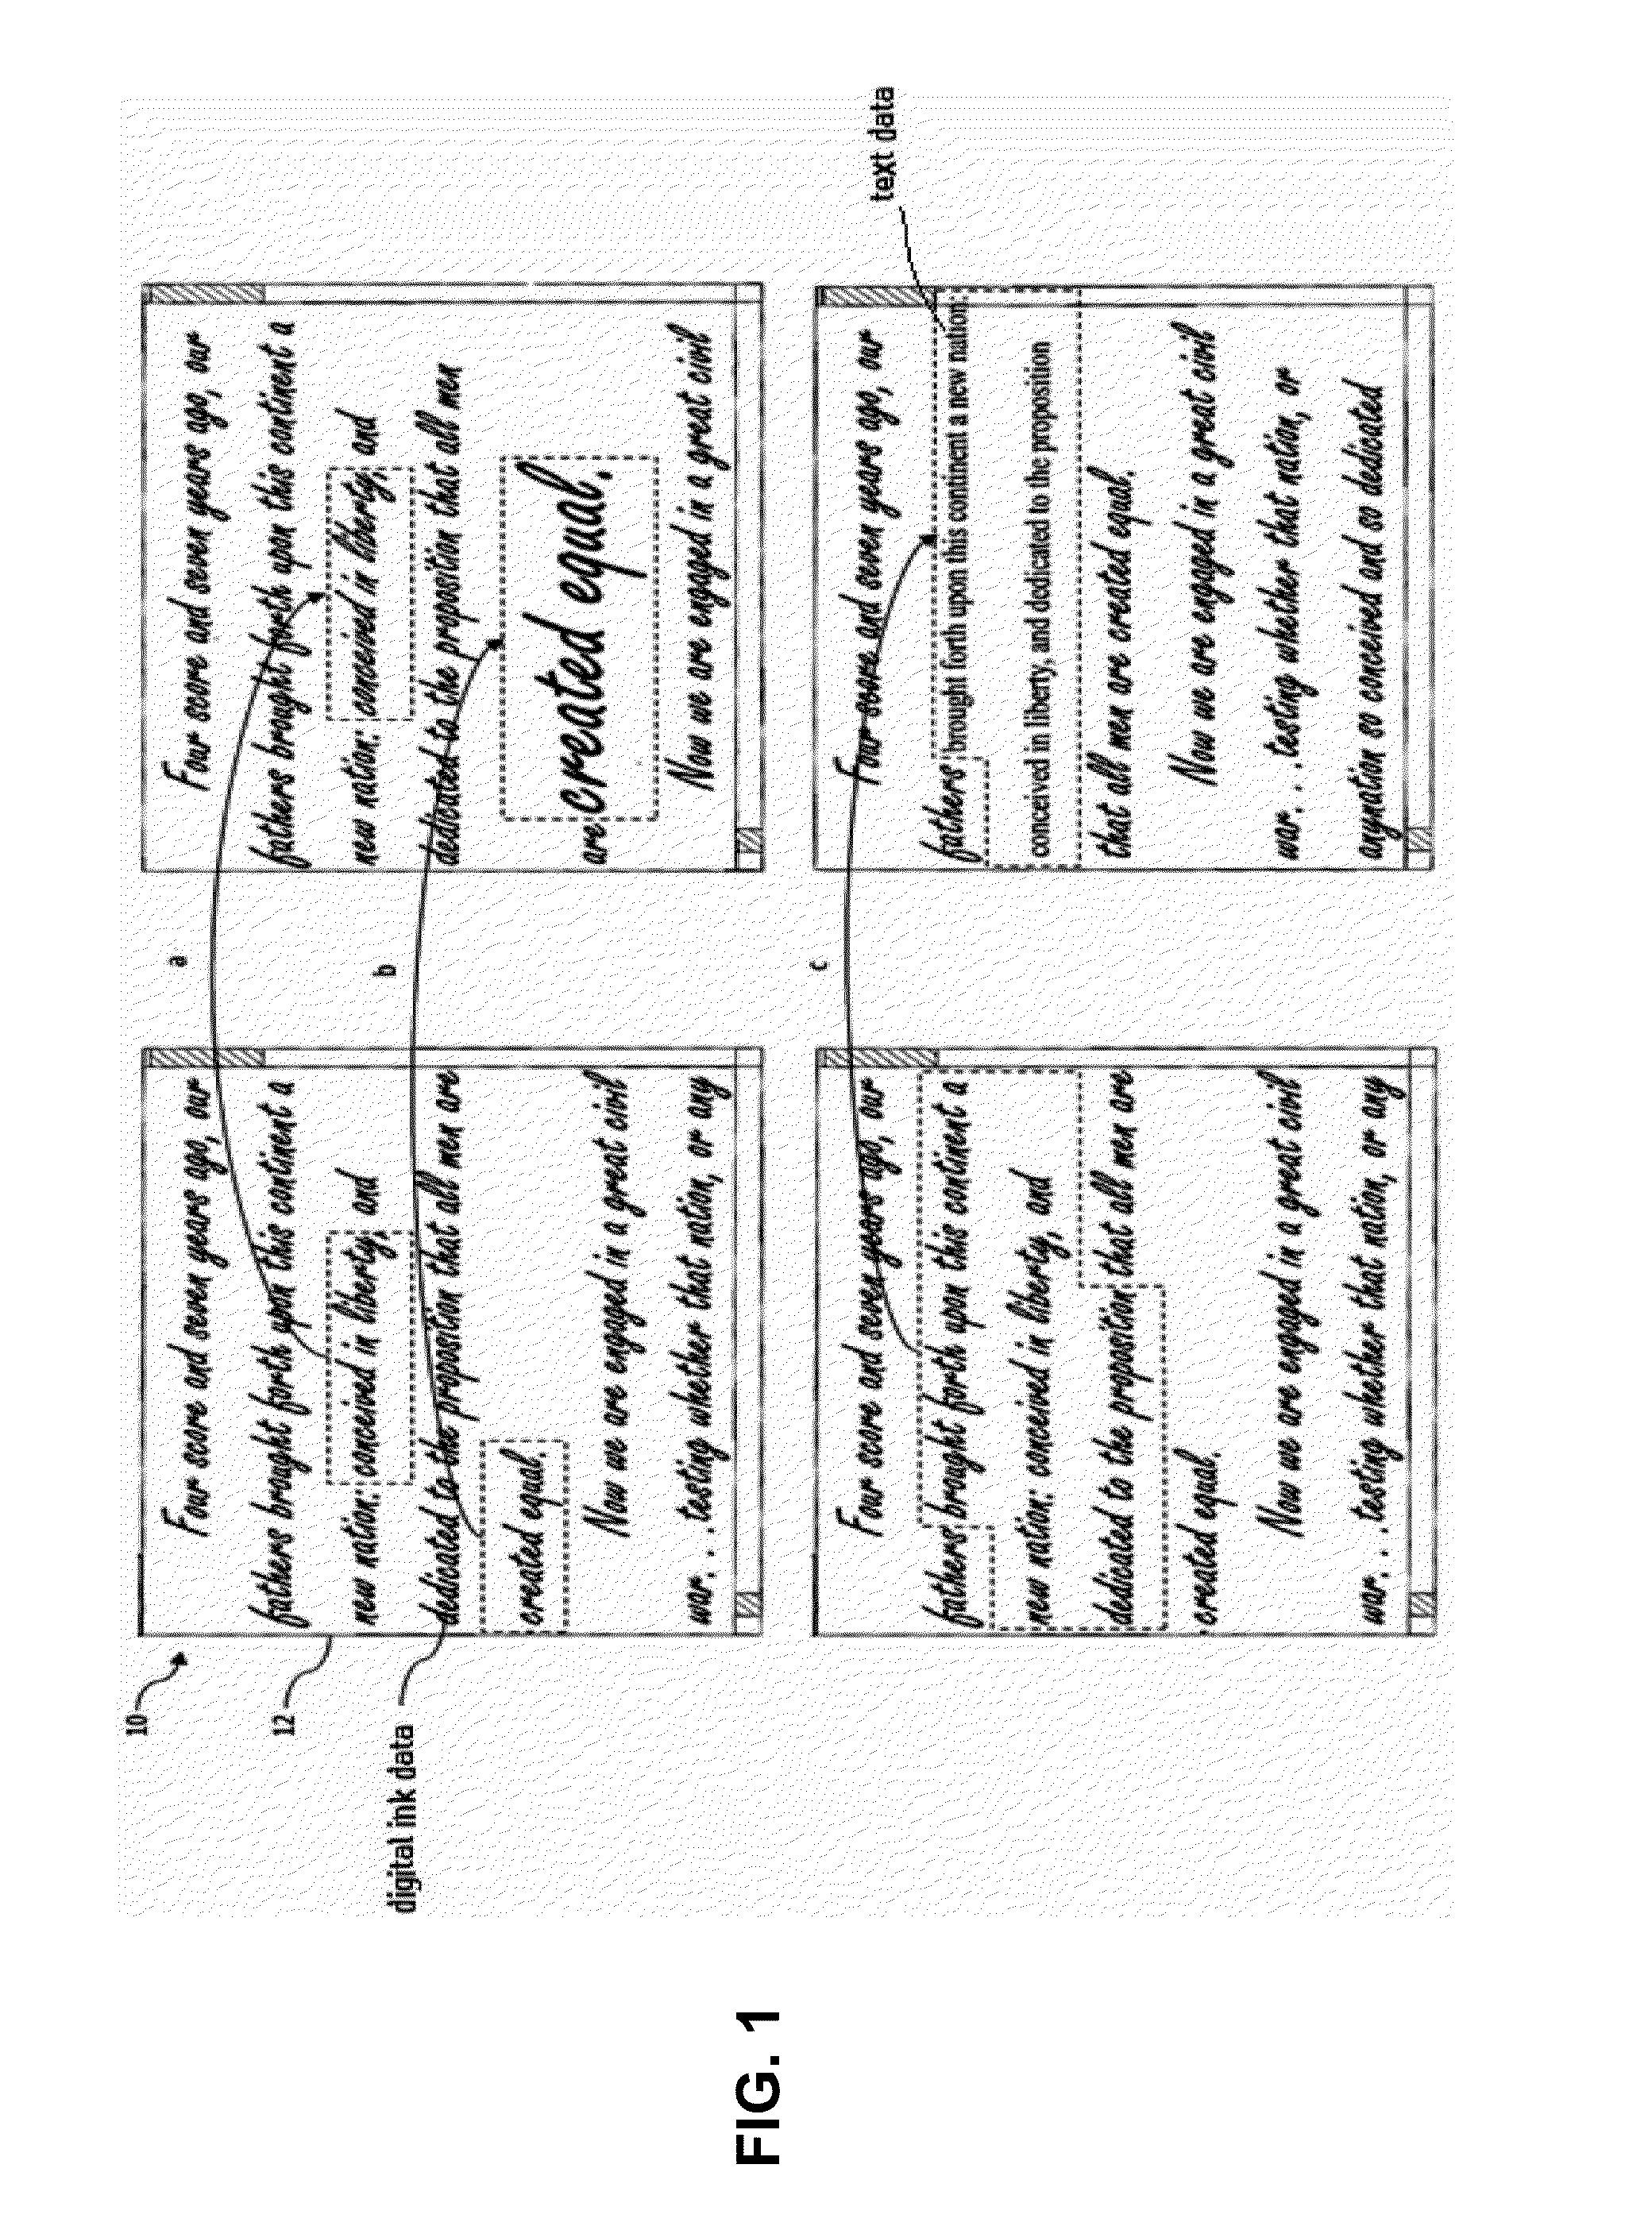 Device and method for editing ink text data